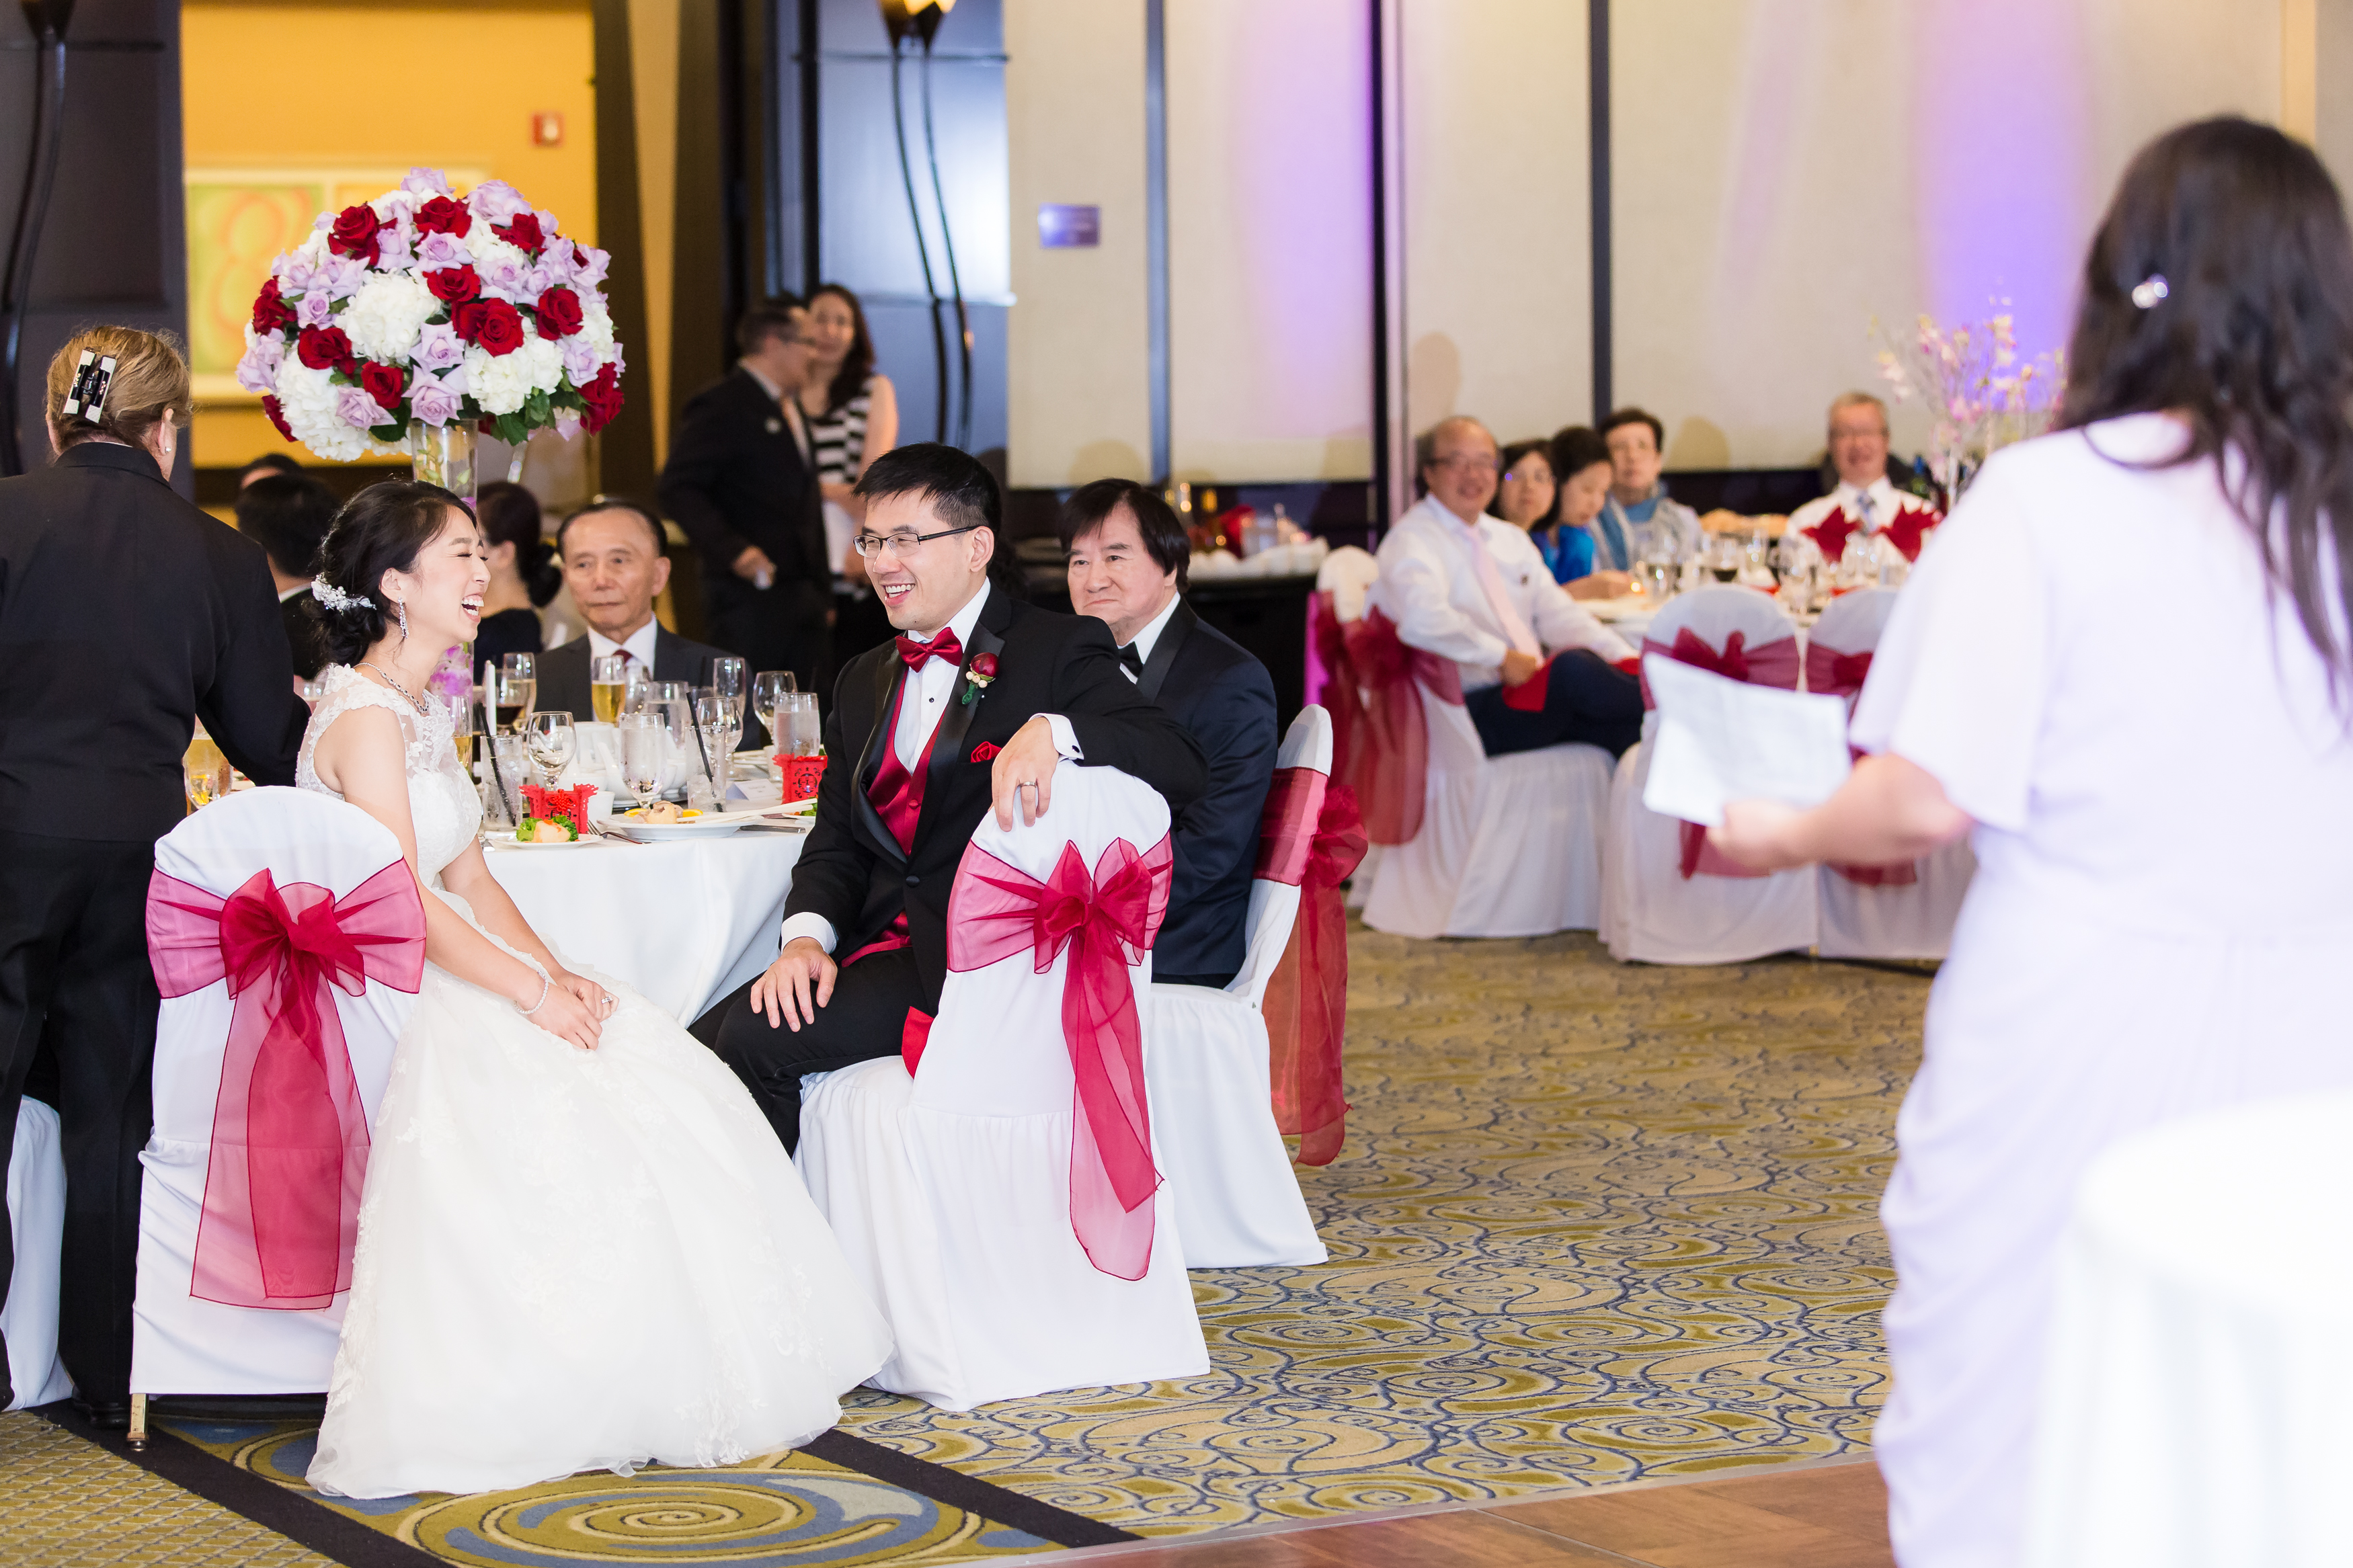 Couple laughing at sweethearts table during wedding reception